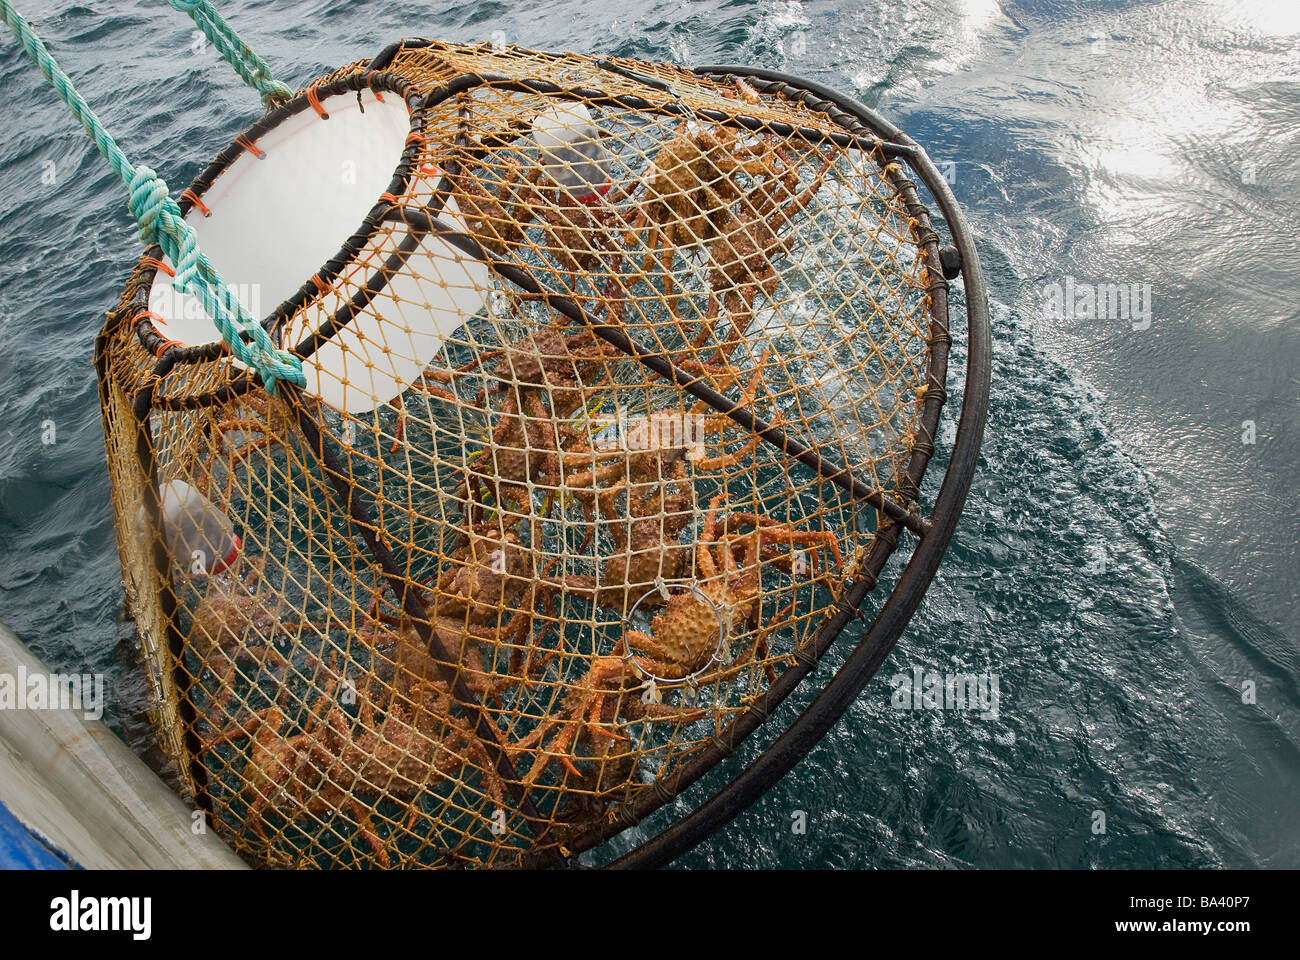 Crab pot is hauled up over the side of the boat during the commercial Brown Crab fishing season in Icy Strait, Alaska Stock Photo